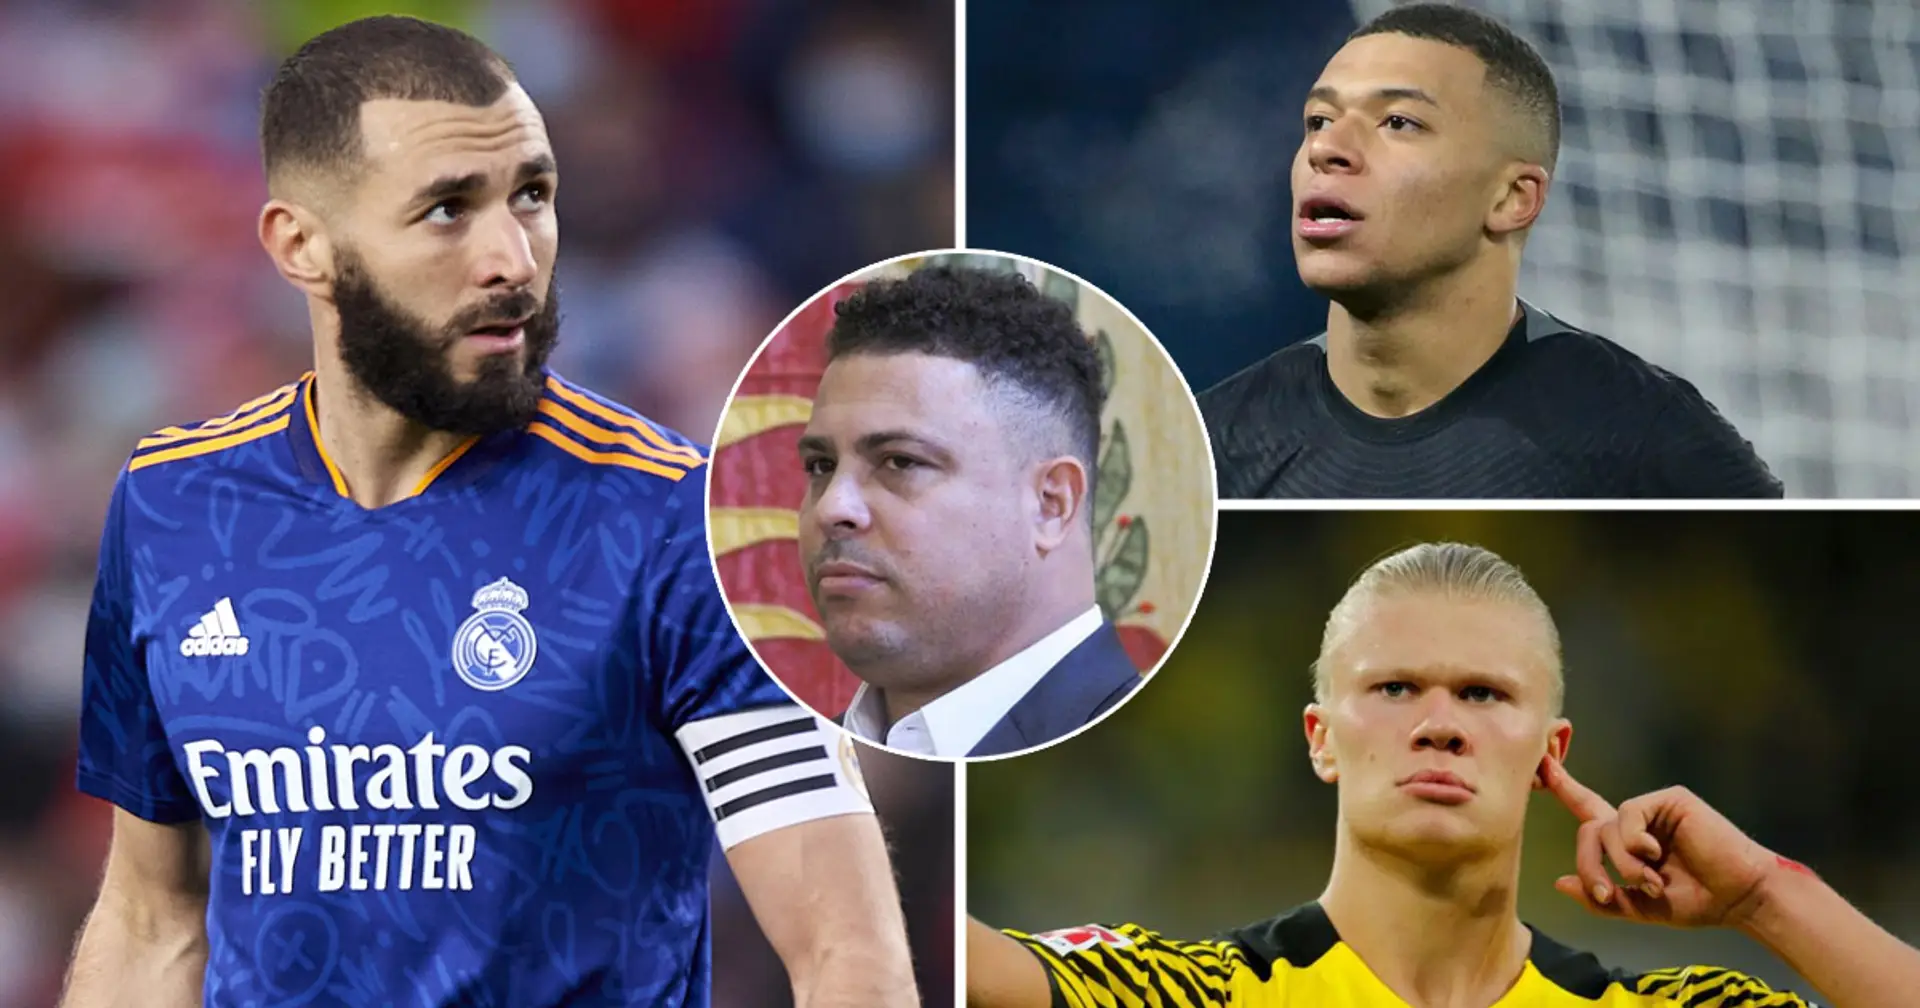 Ronaldo Nazario labels Benzema best striker in the world, mentions Mbappe and Haaland